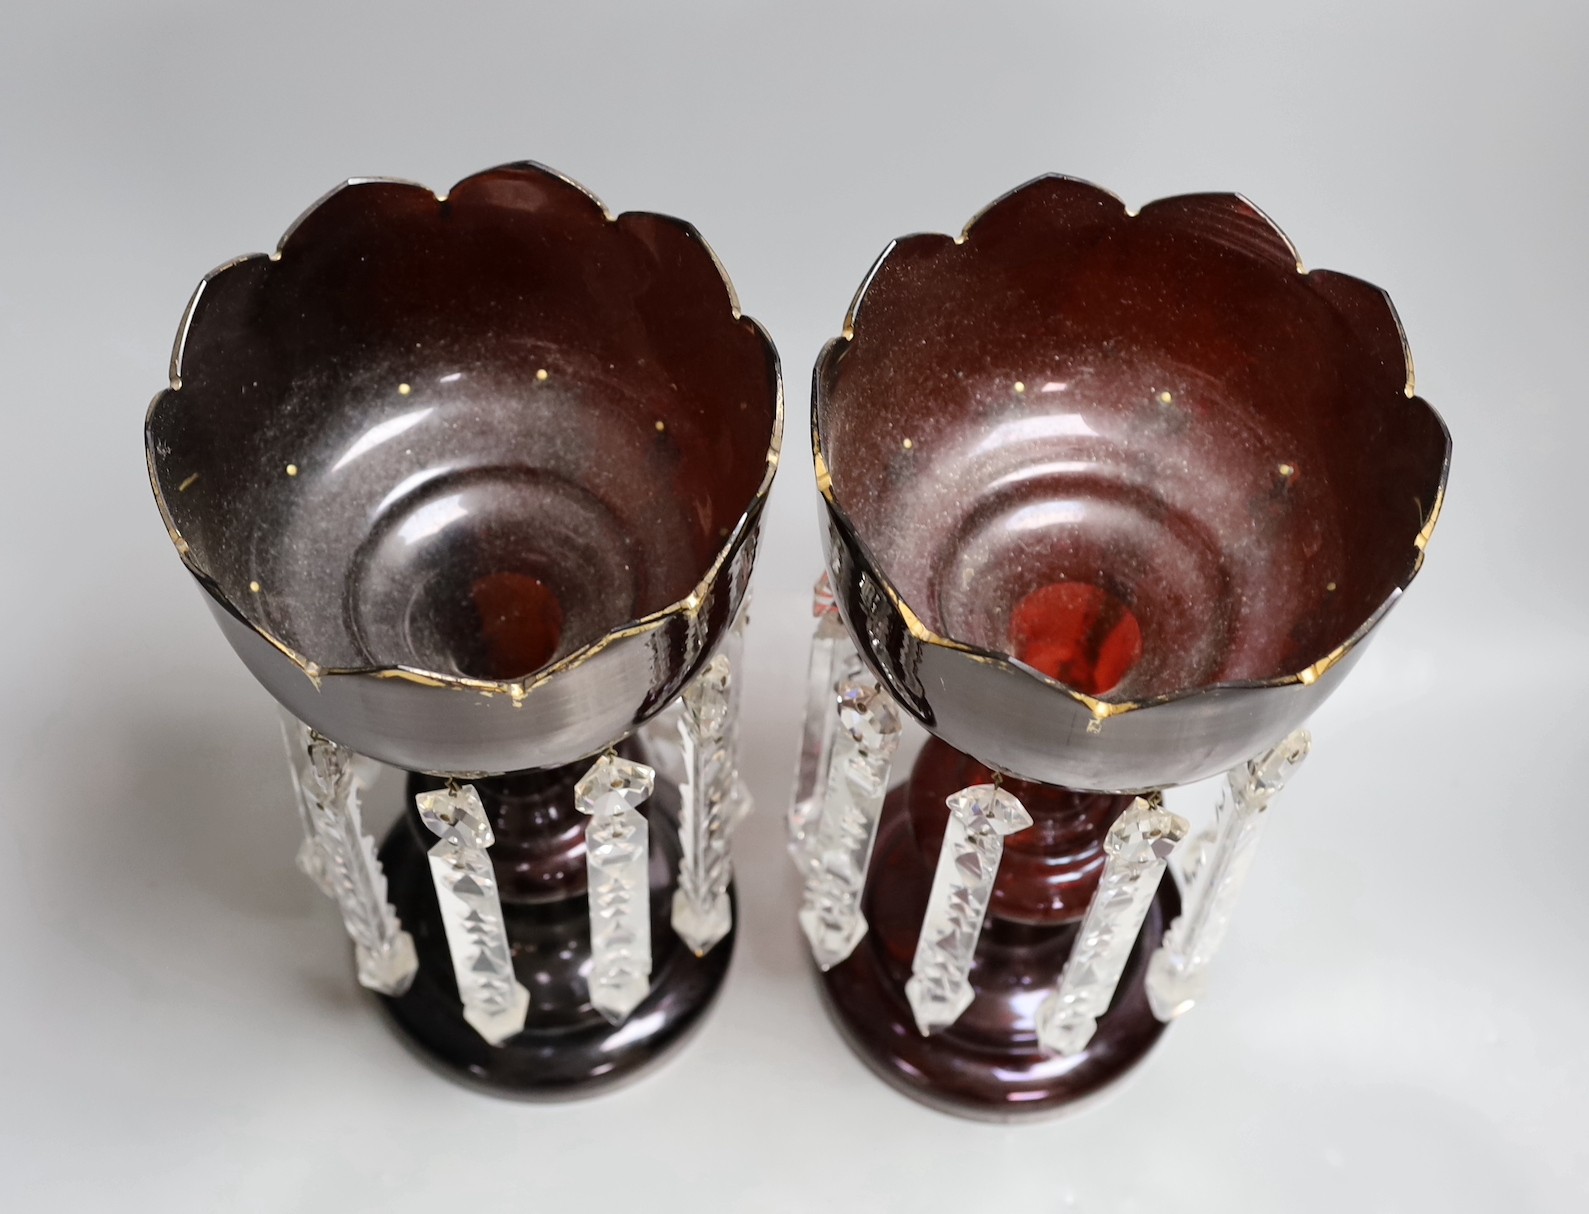 A pair of 19th century ruby glass table lustres, 34cm